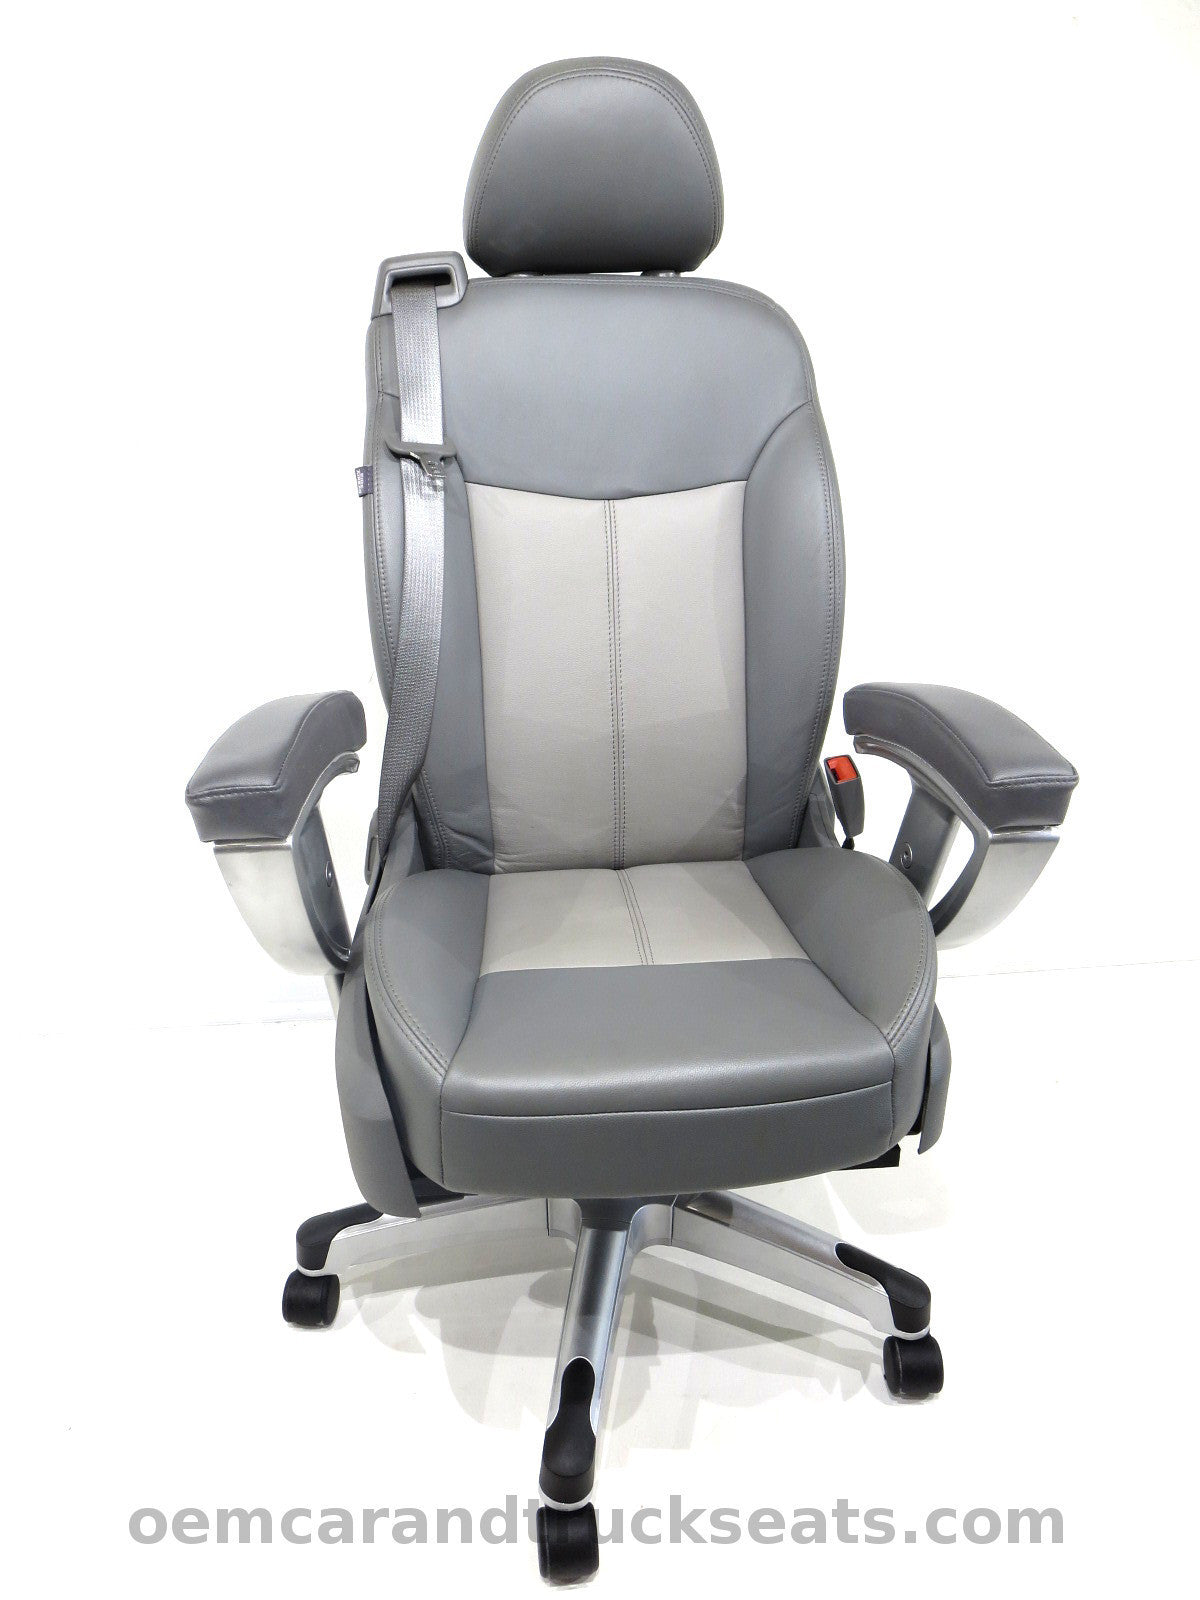 Replacement Office Chair With Seatbelt T O D The Office Drunk